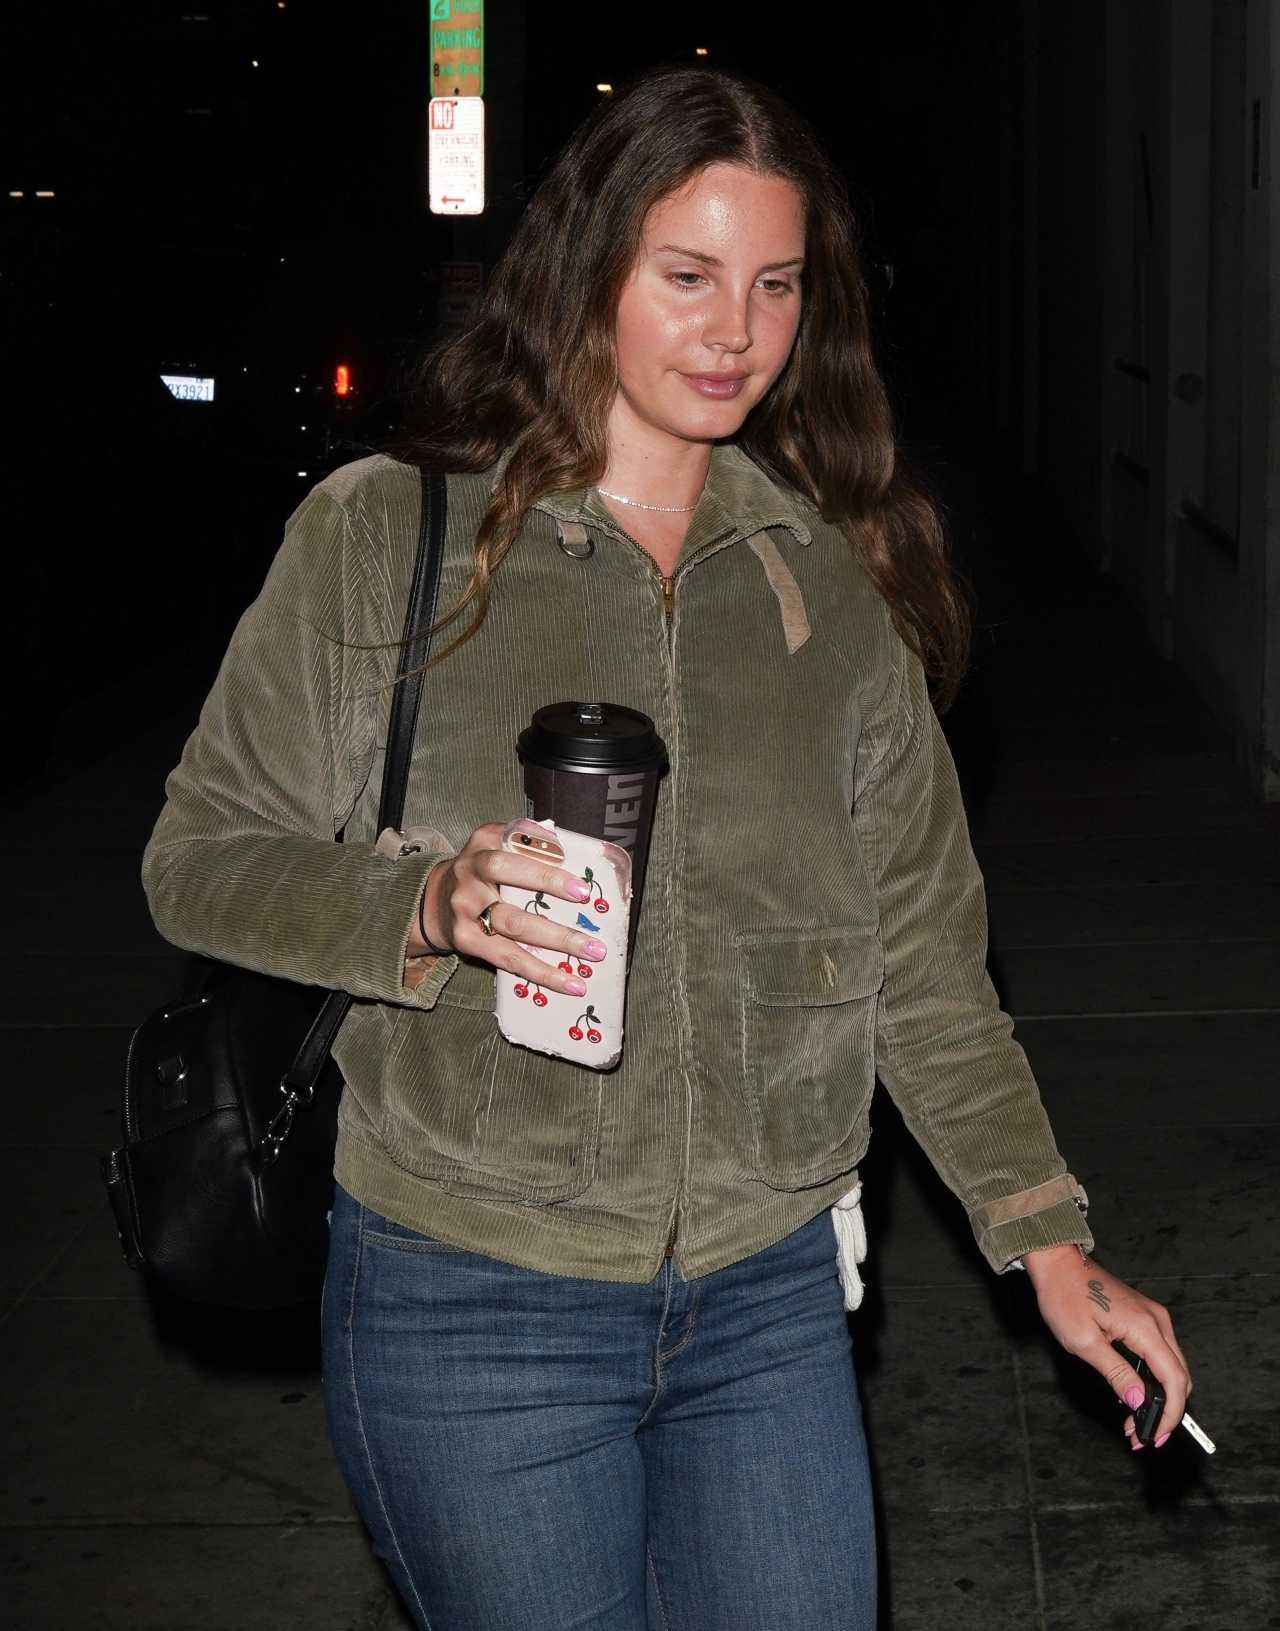 Lana Del Rey attends church services in Los Angeles